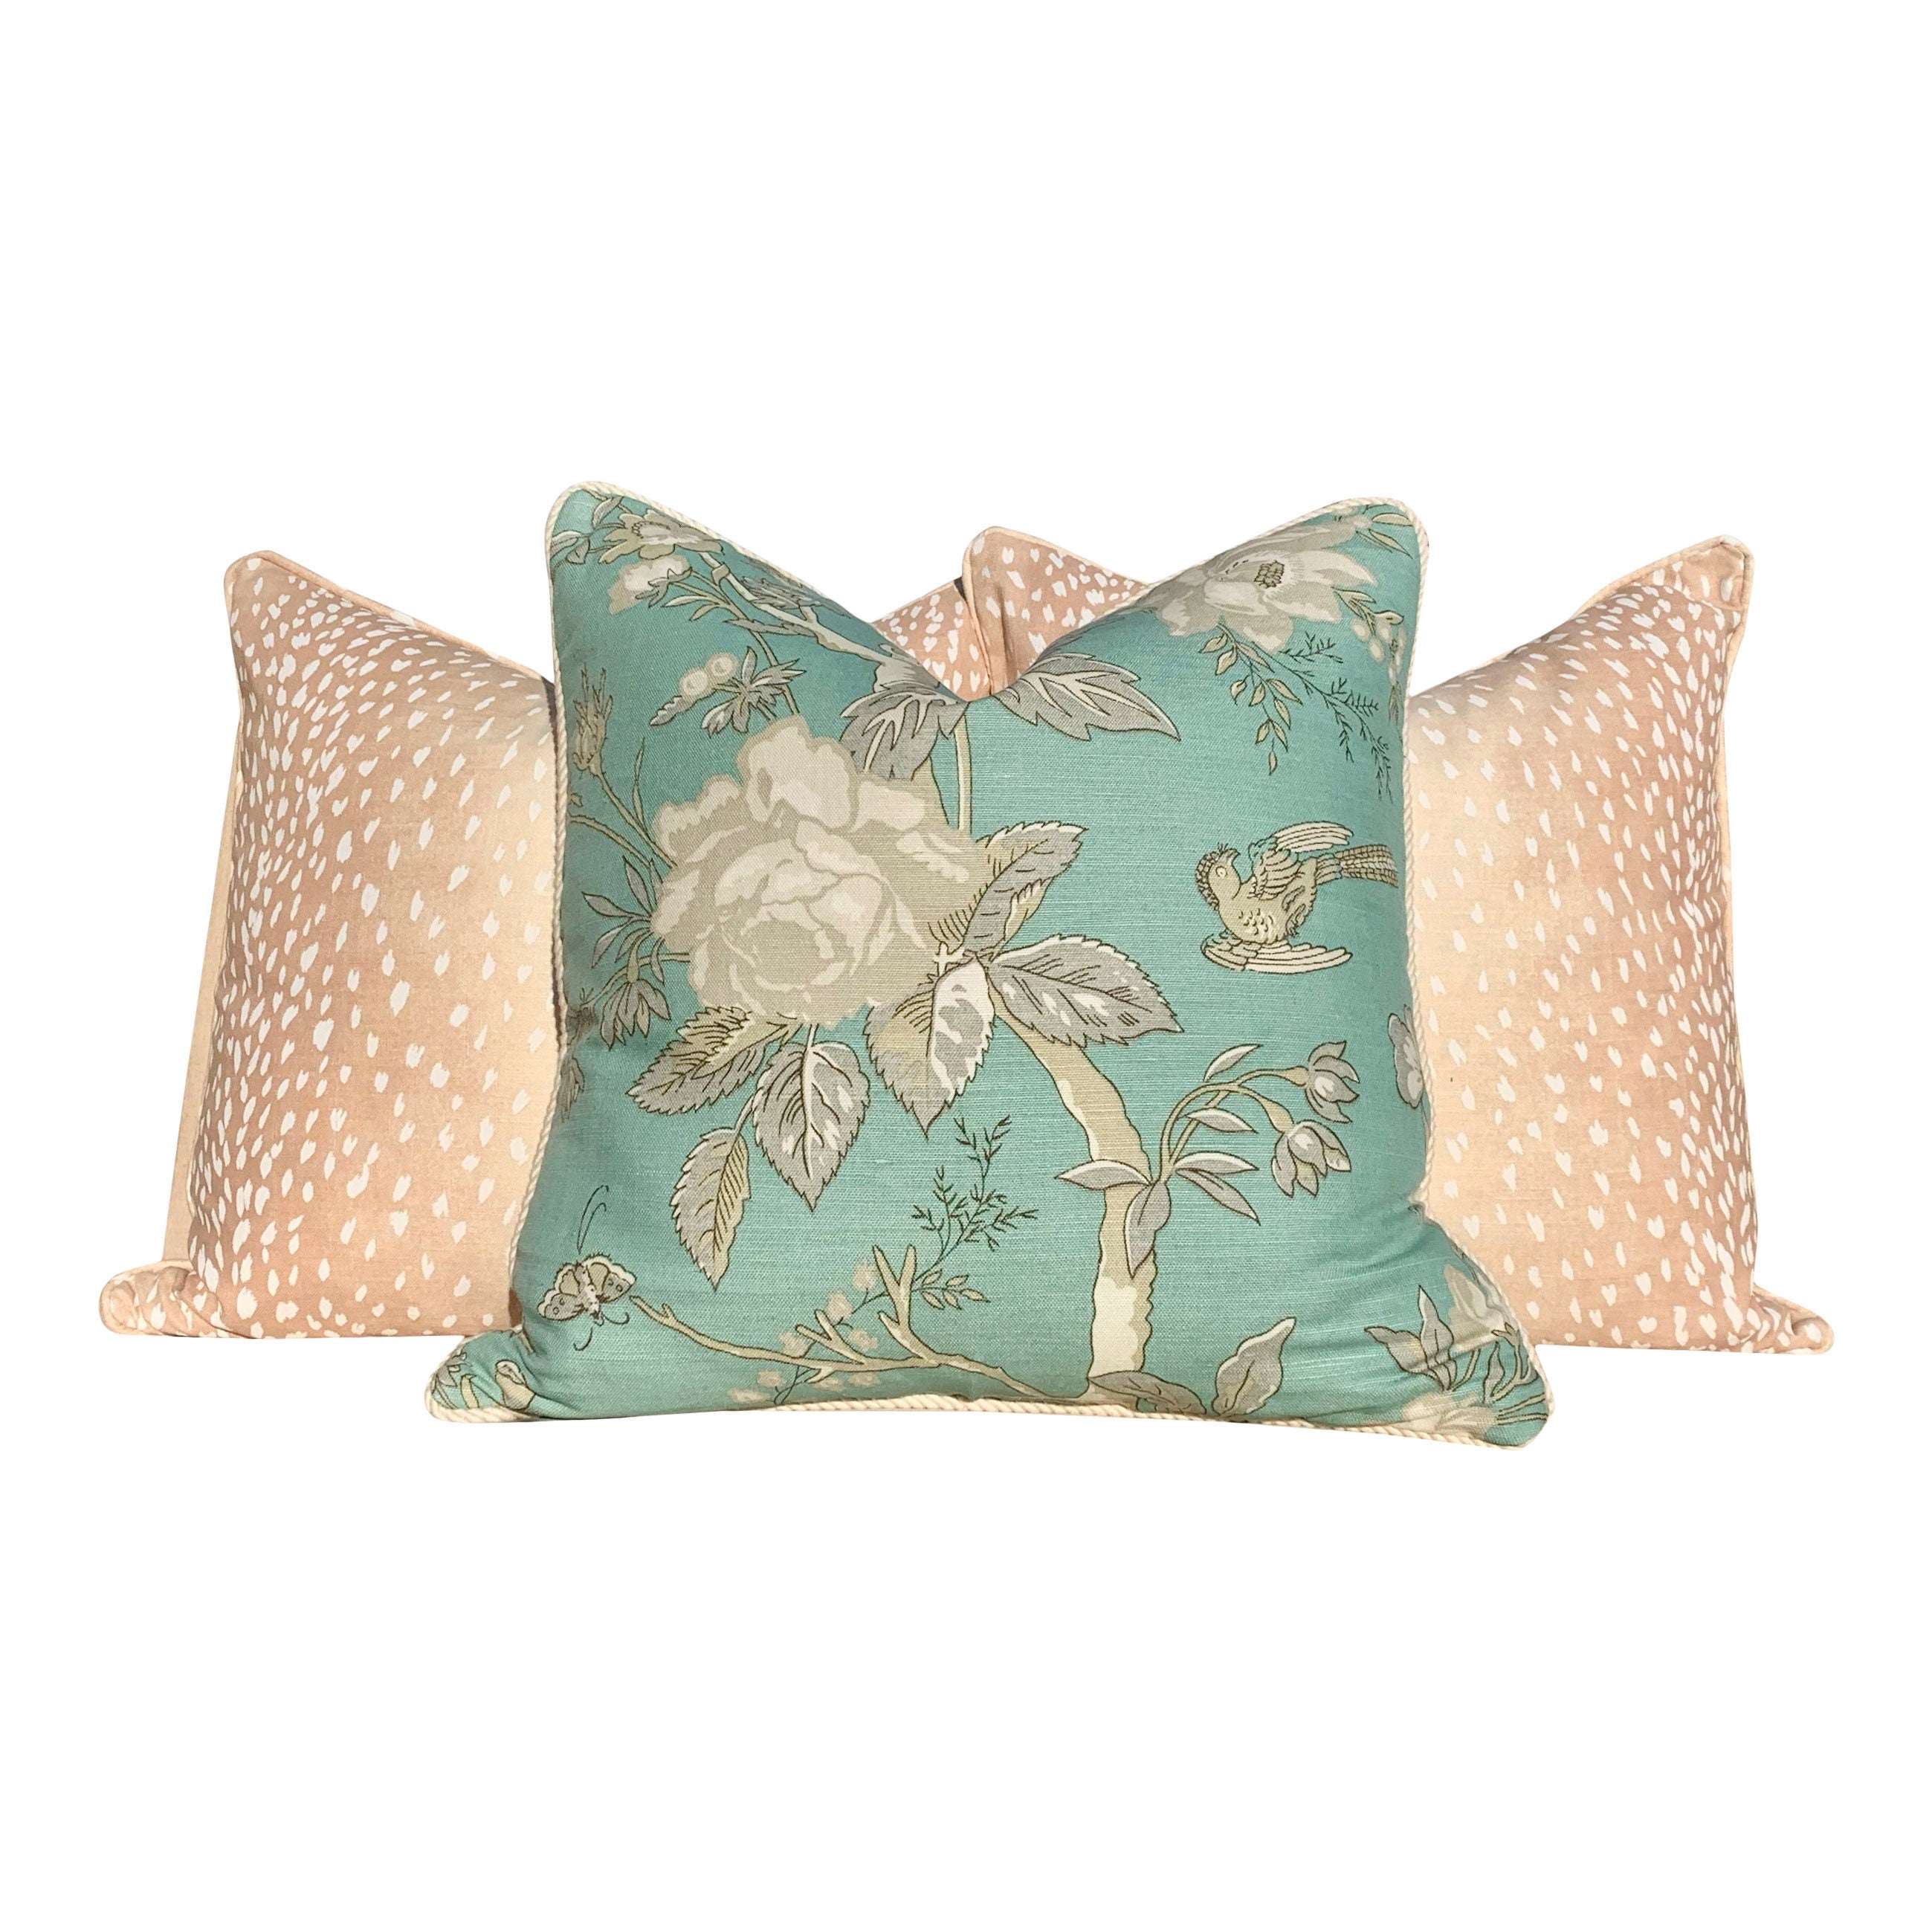 Thibaut Nemour Floral Pillow In Aqua Green Embellished with Cotton Rope Trim . Lumbar Floral Pillow.